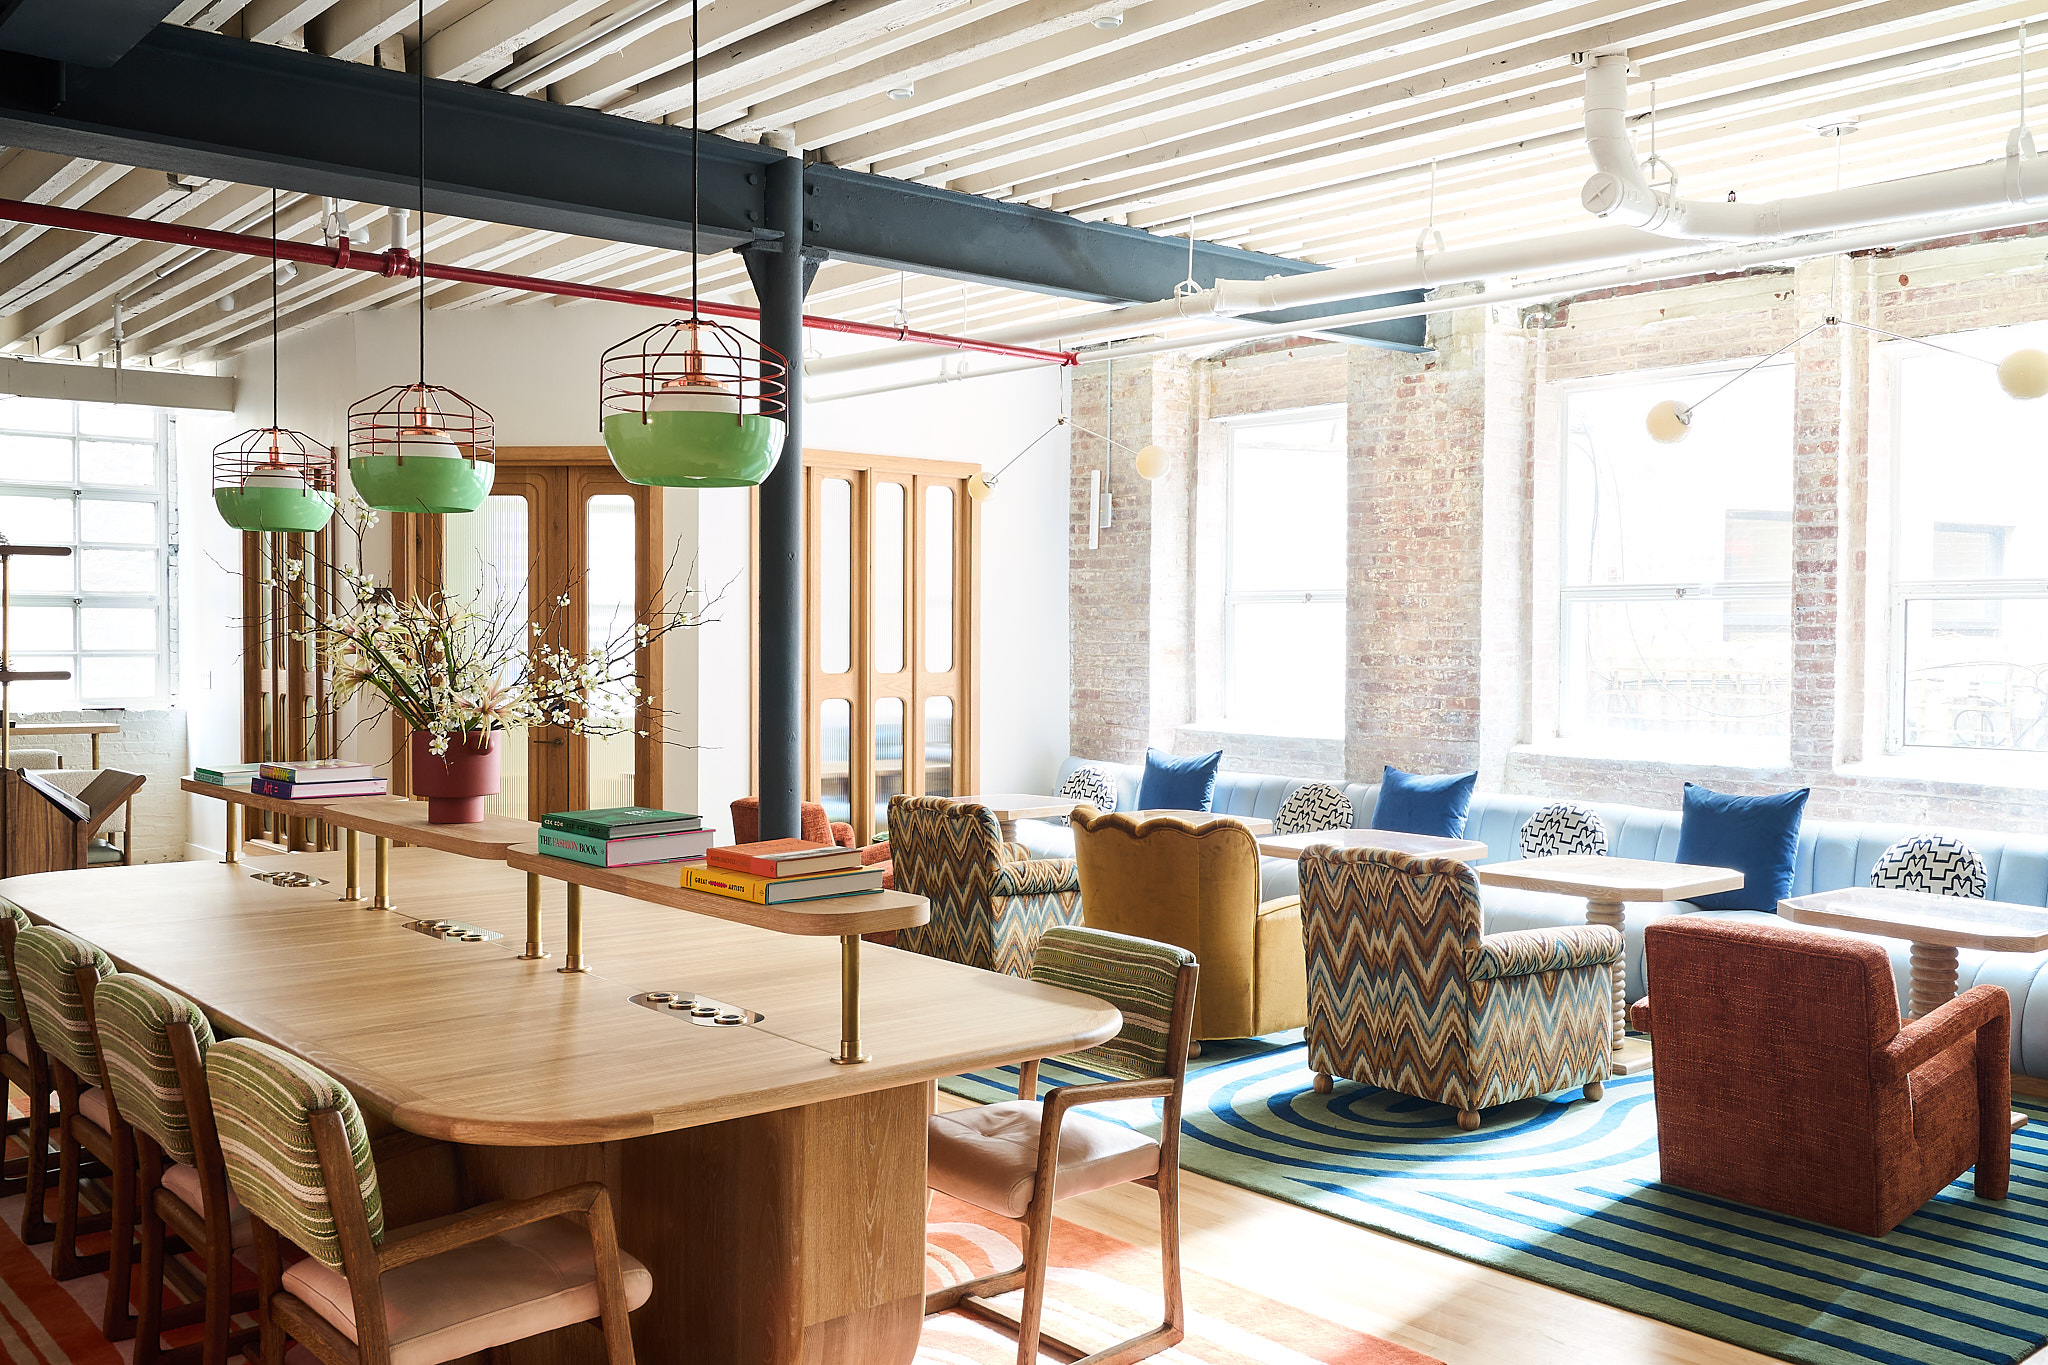 The Malin opens its third members-only coworking space in New York's West Village